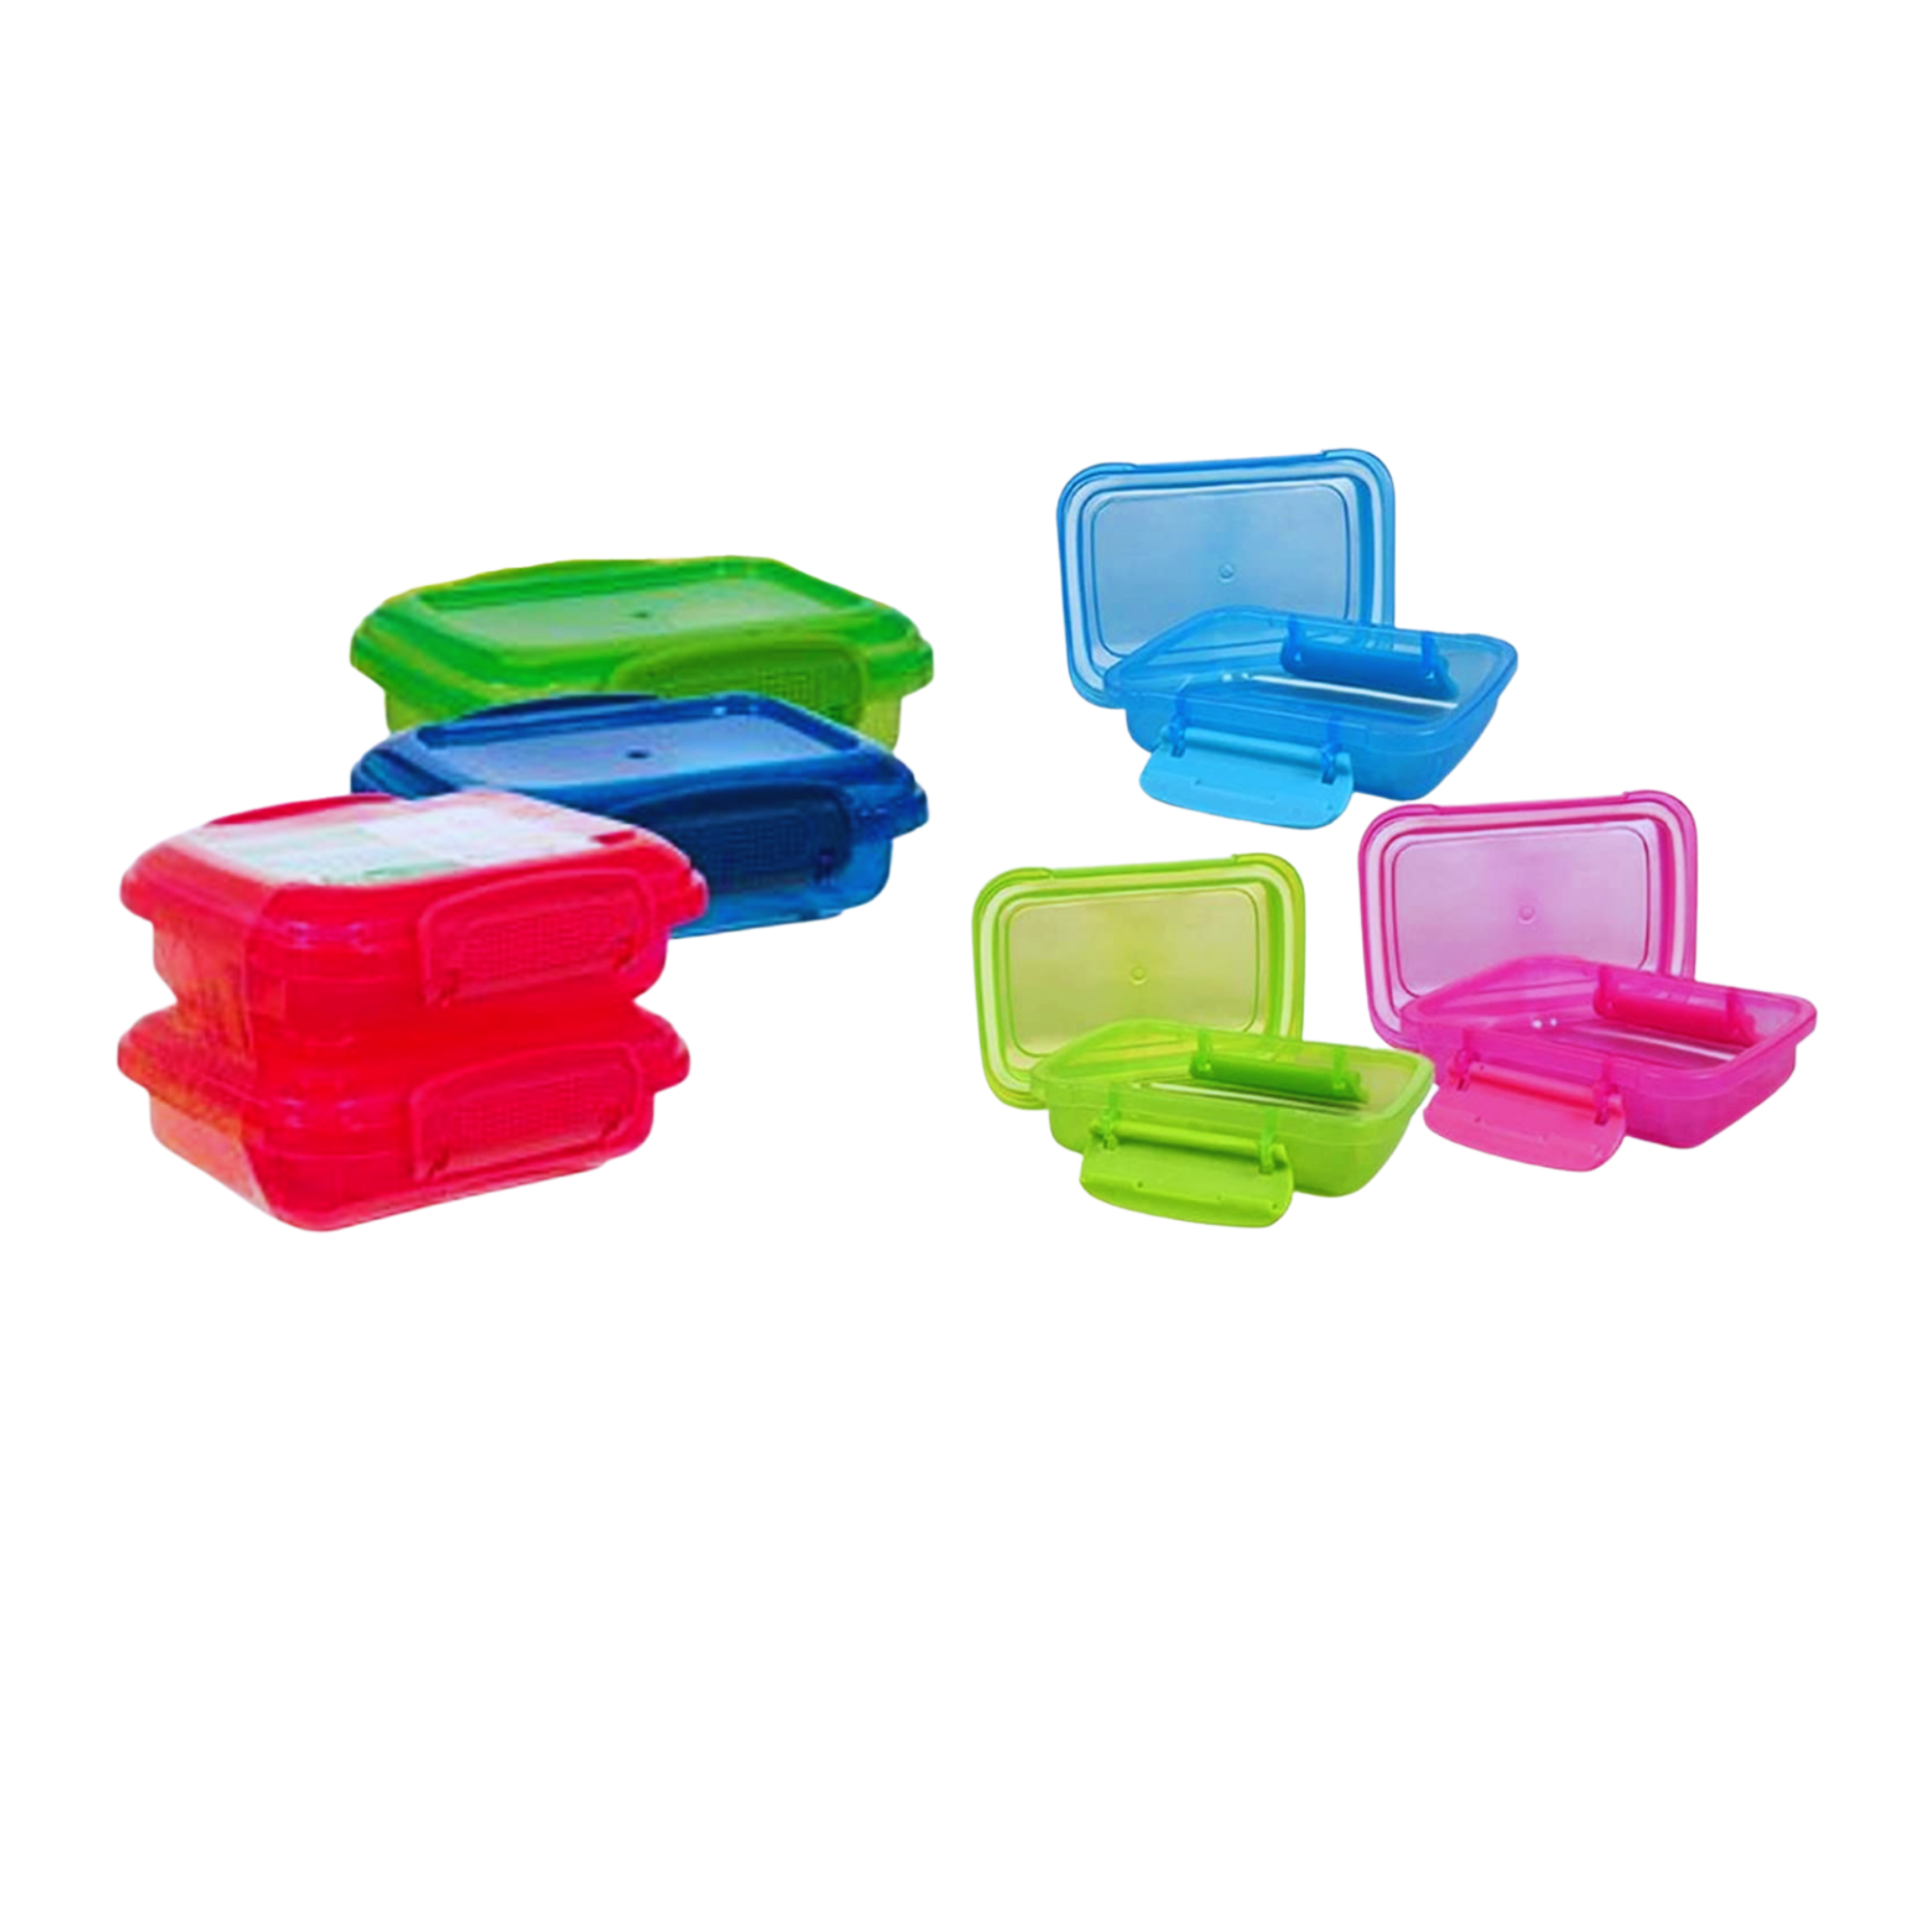 New- Lock Top Snack Containers With Lids- Pink- 2 Pack - 5.2 FL Oz